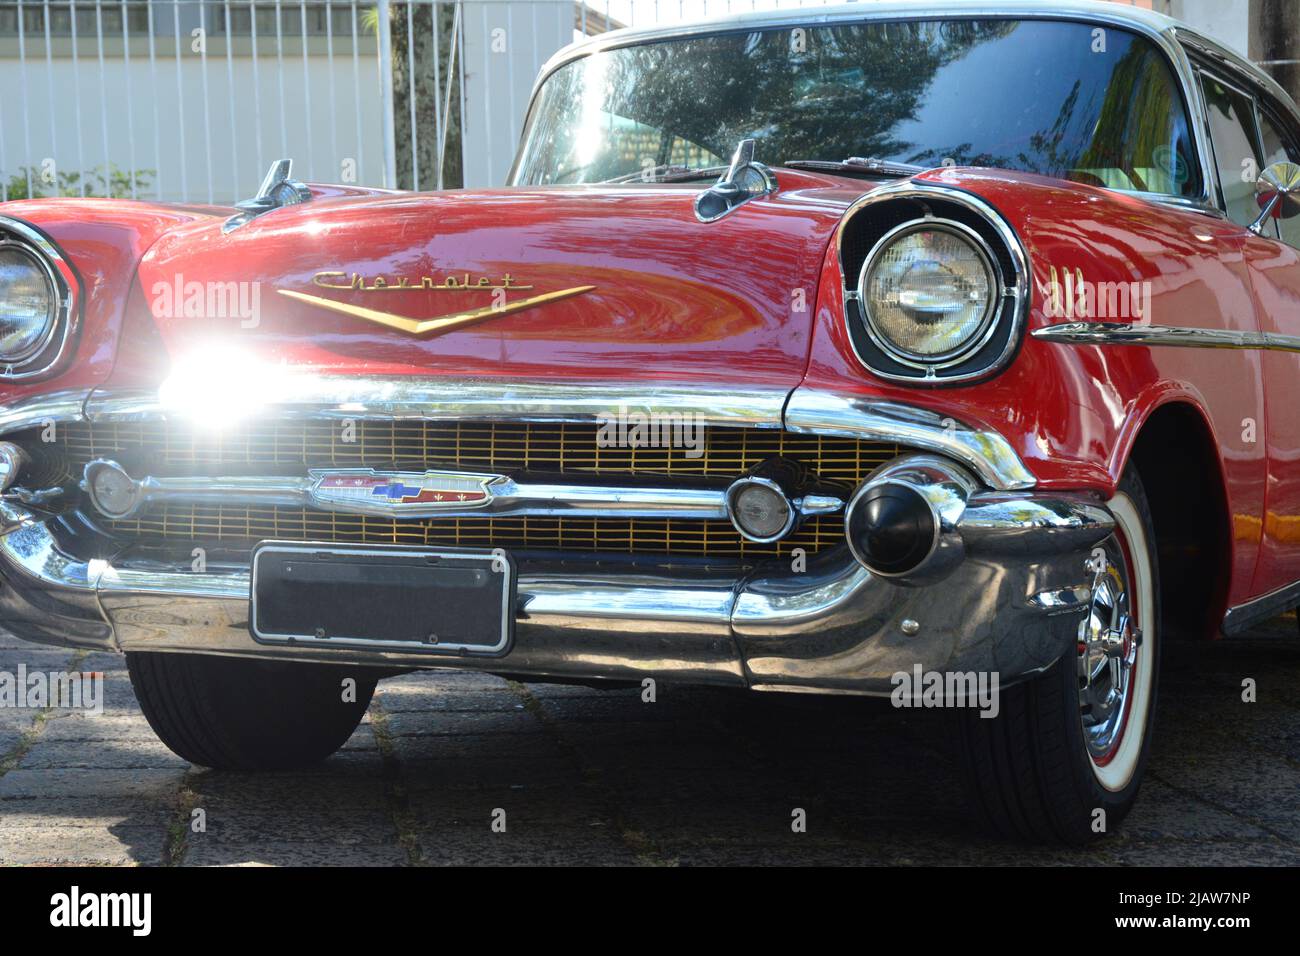 Vintage Belair chevrolet car on exhibition of vintage cars in Brazil, South America, bottom-up view, red color Stock Photo